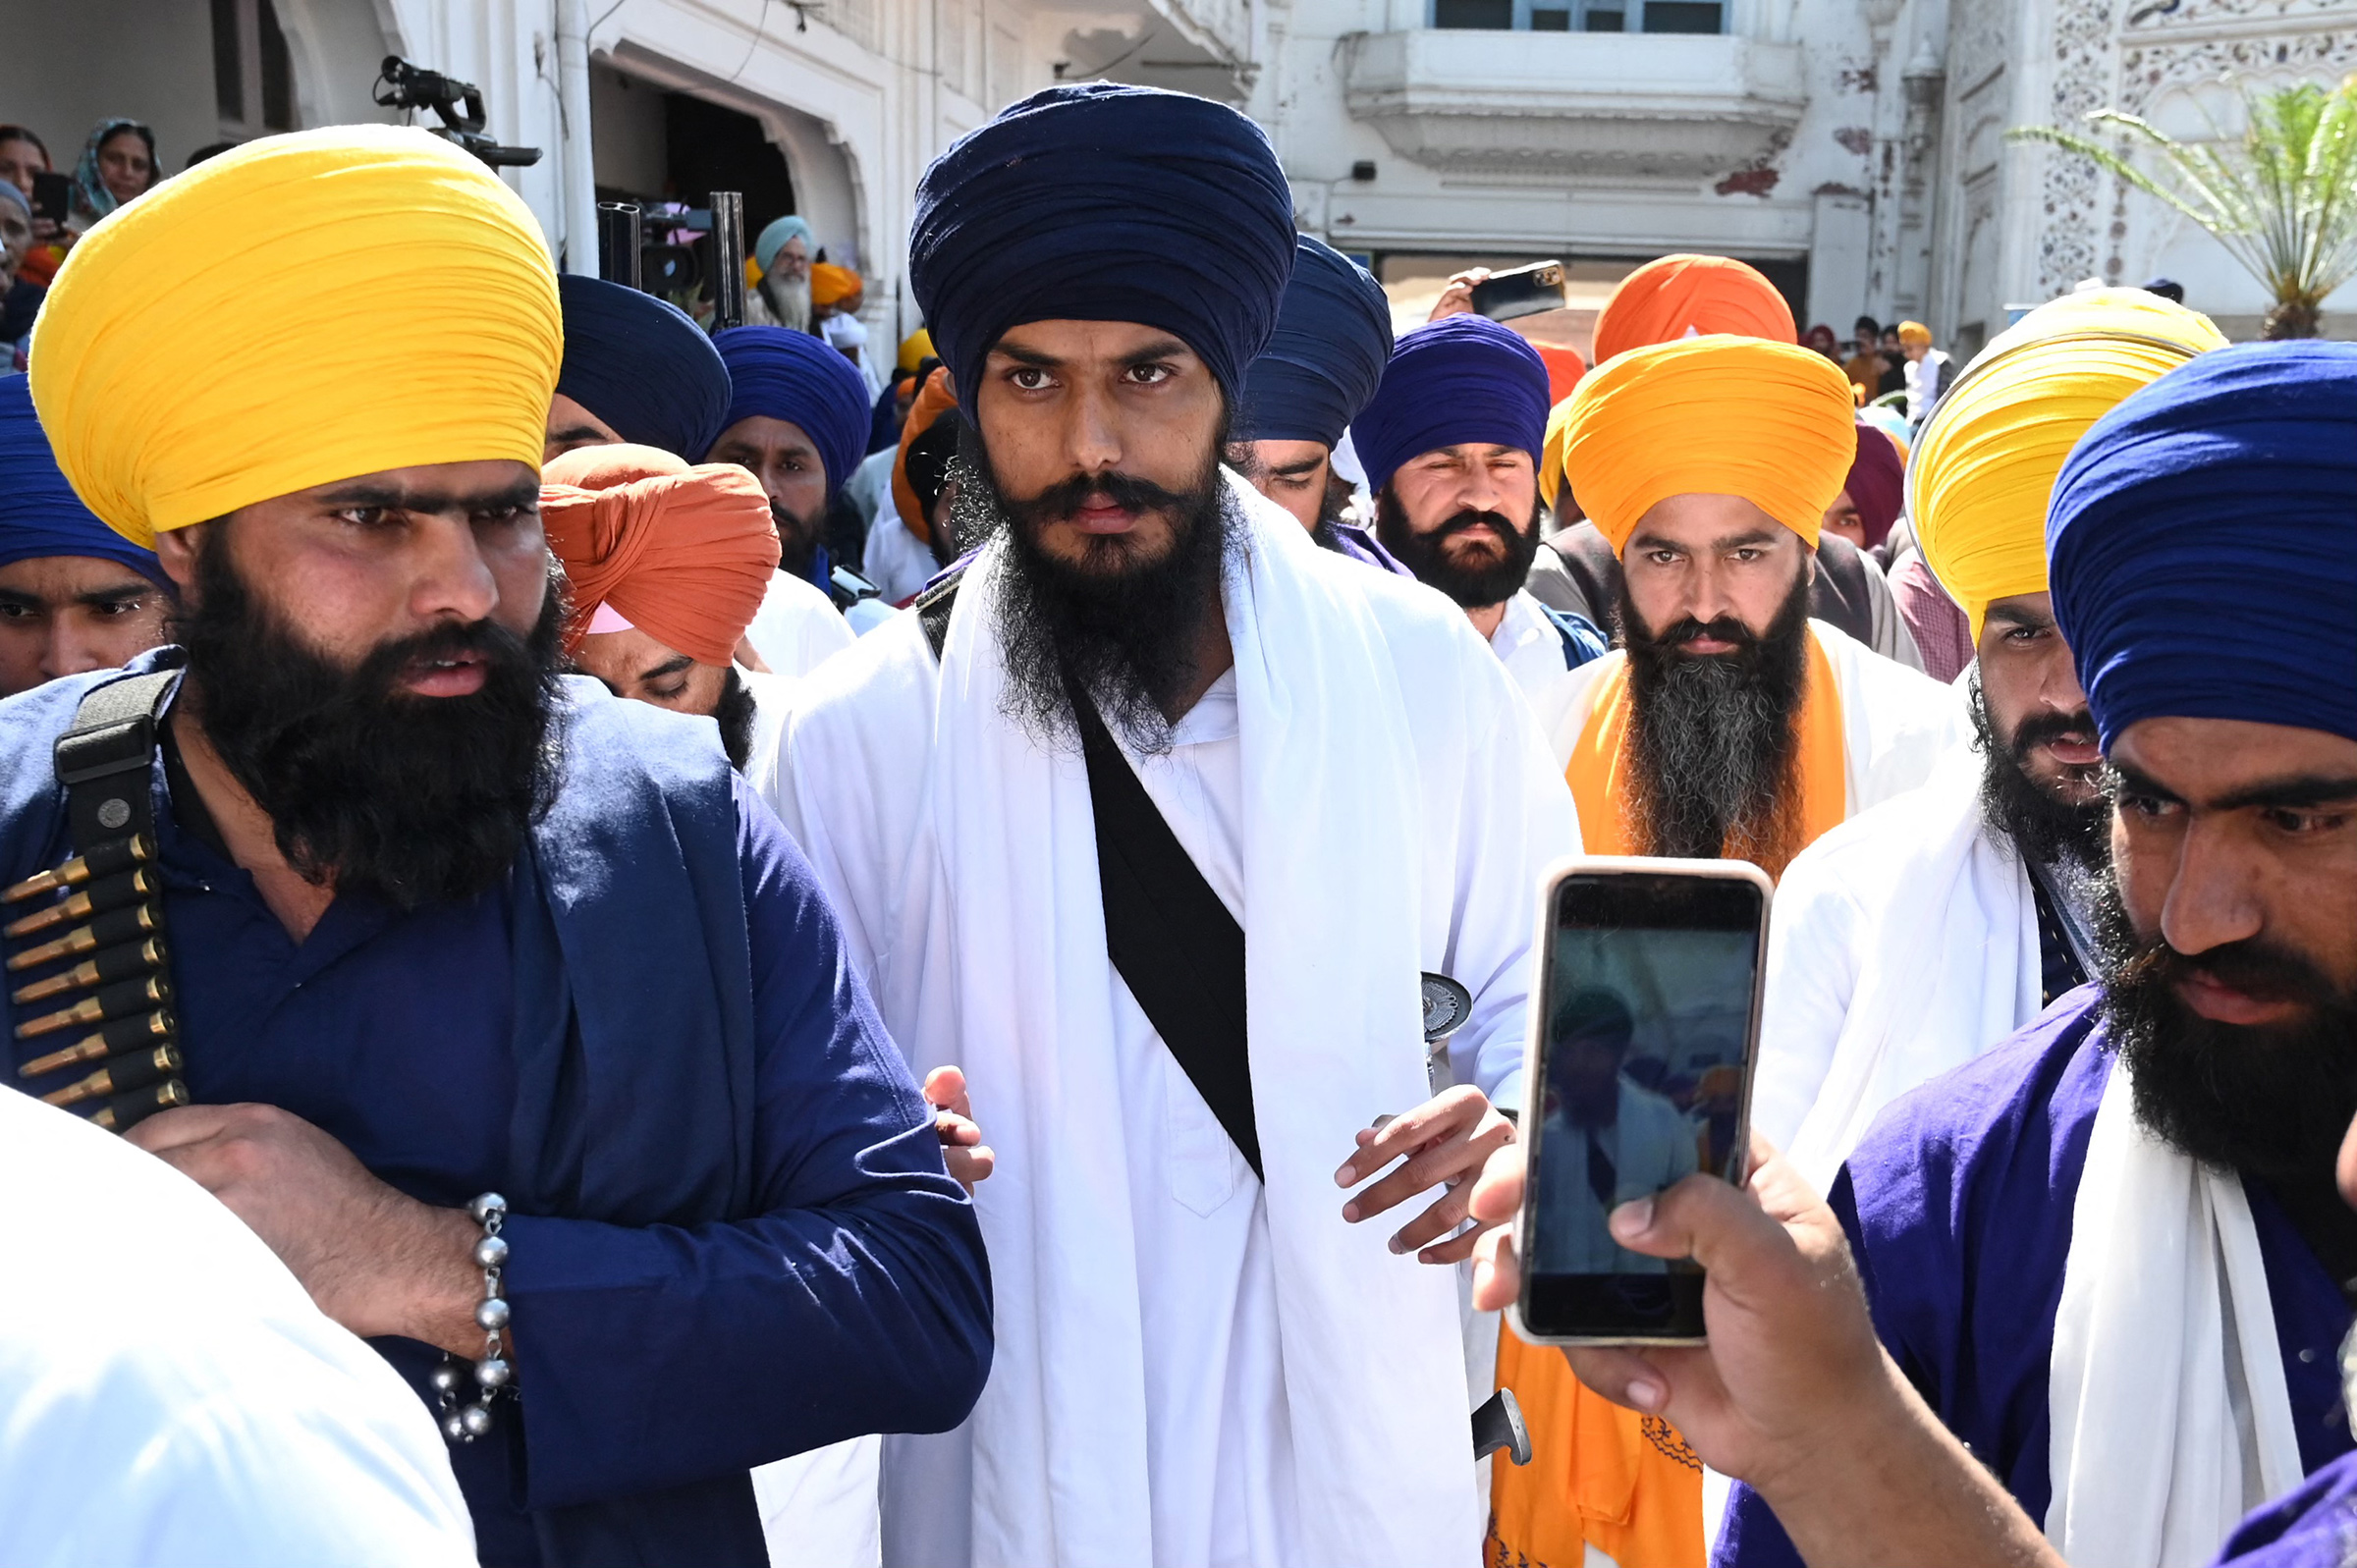 Amritpal singh, center, pays his respects at the golden temple in amritsar on march 3. (narinder nanu — afp/getty images)